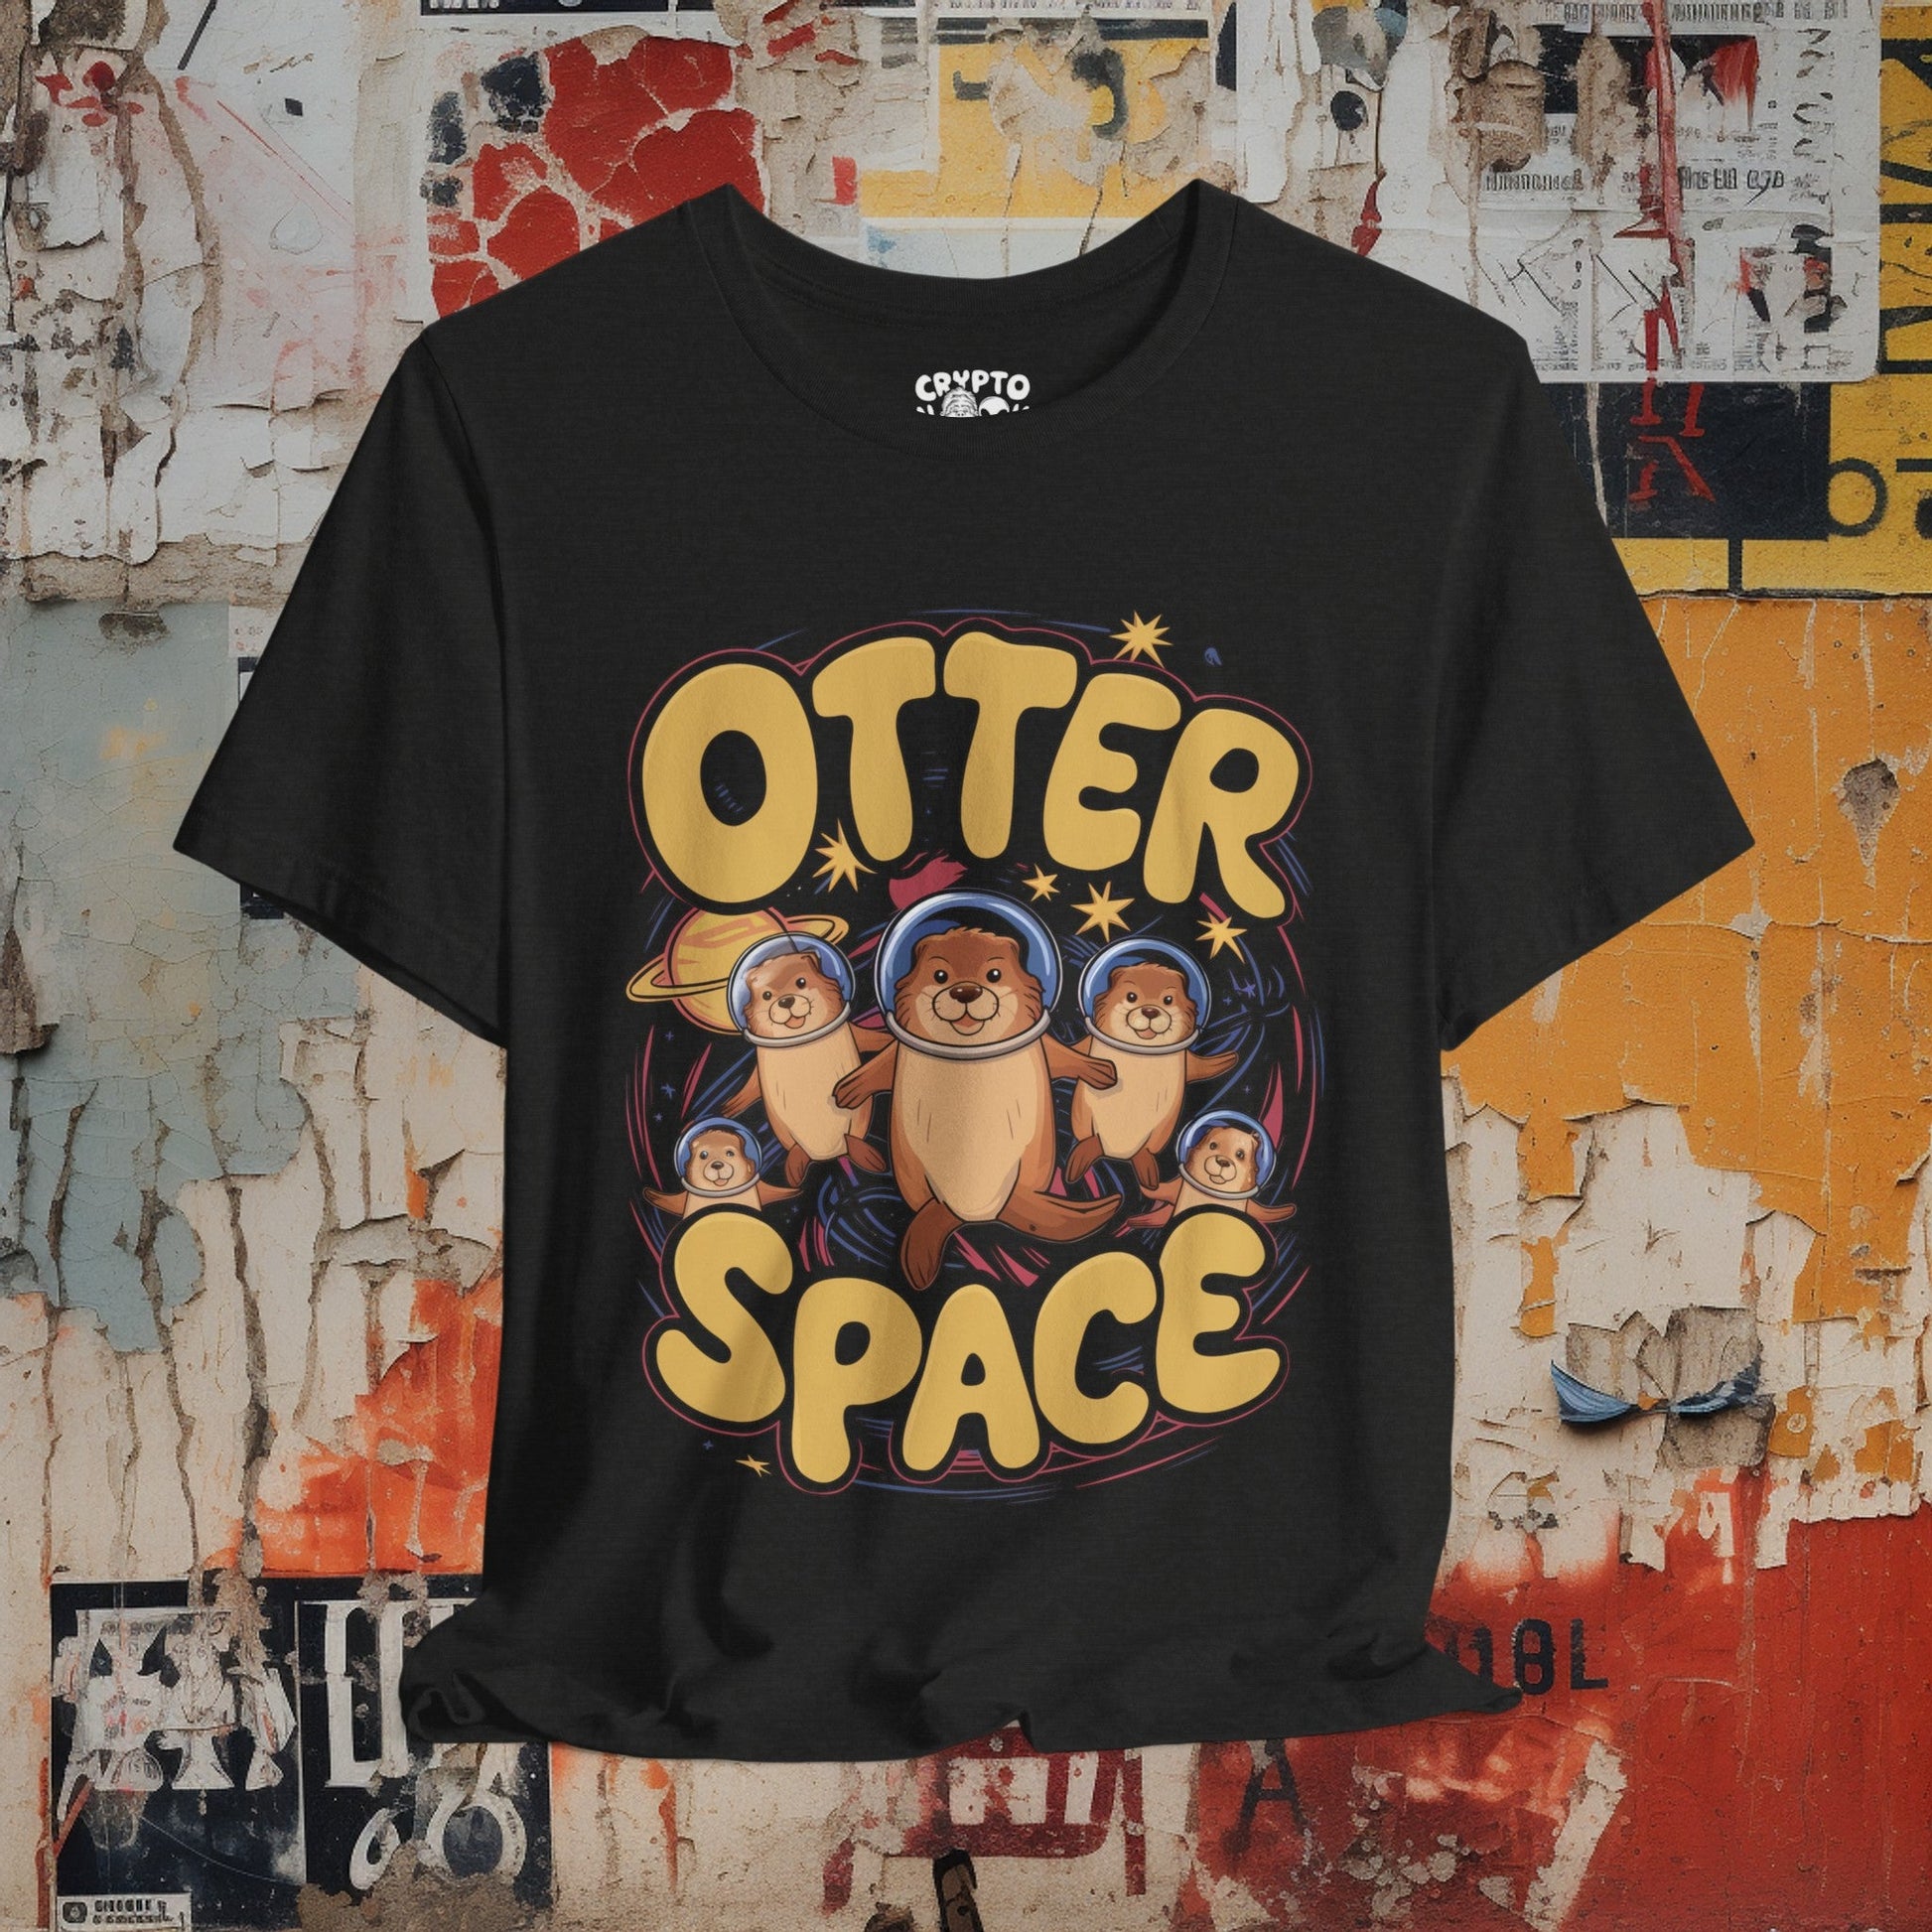 T-Shirt - Otter Space Cute Funny Astronaut Otter Tee | Bella + Canvas Unisex T-shirt from Crypto Zoo Tees